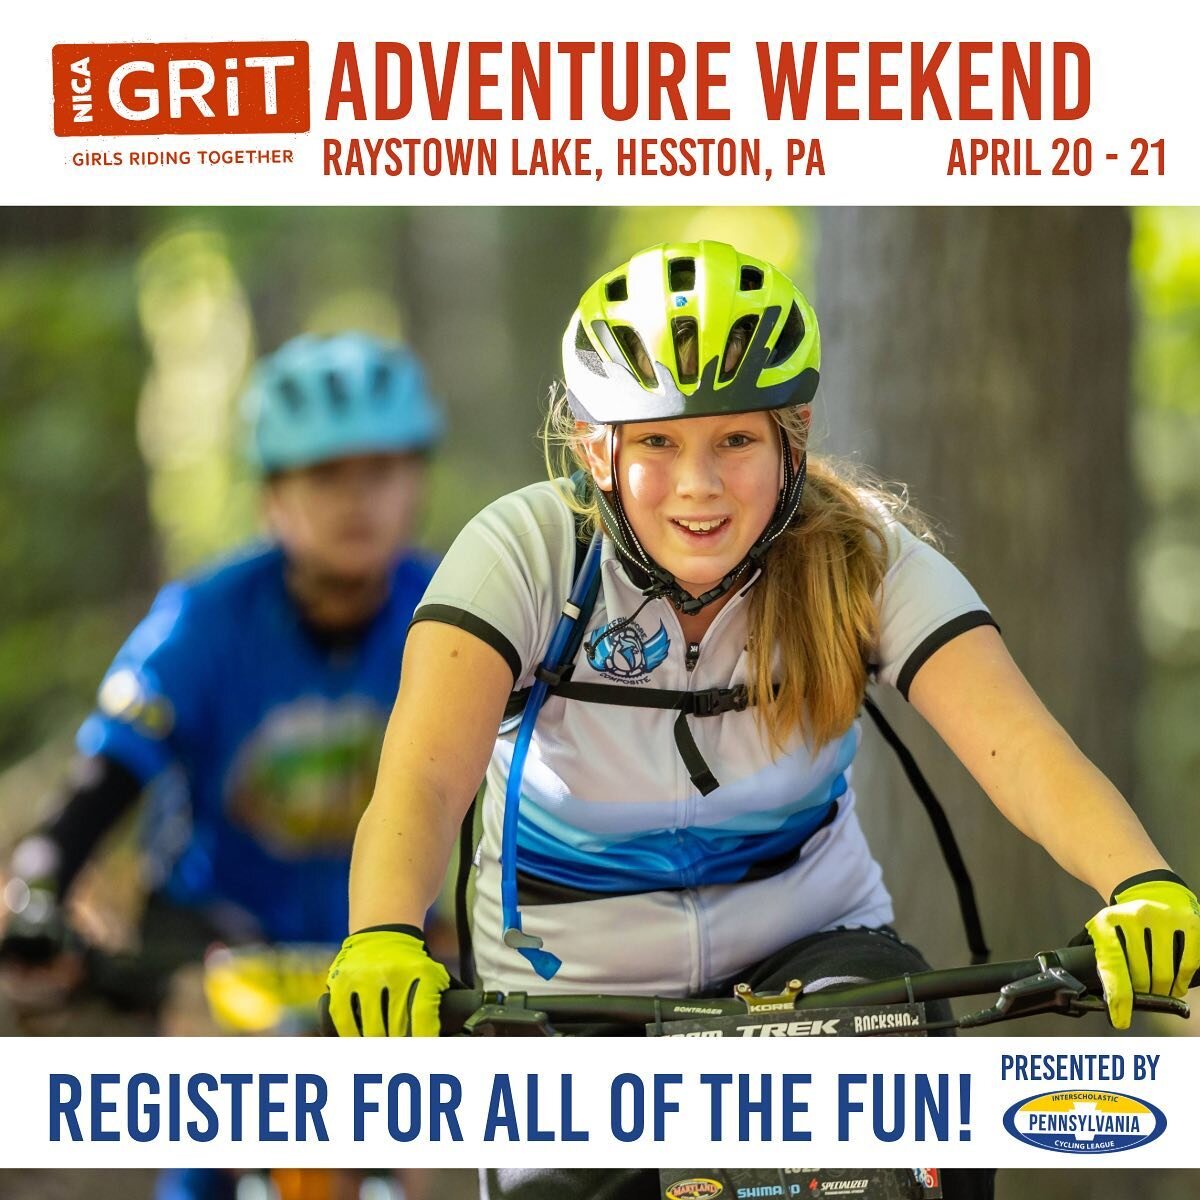 ⏰ Time for a spring weekend of fun &amp; friends?

April 20 &amp; 21st will be the GRiT Adventure Weekend at Raystown Lake, Hesston, PA!

There will be:⁠
📍on and off-the-bike activities,&nbsp;
📍campfires and laughs,&nbsp;
📍smiles and miles,&nbsp;
